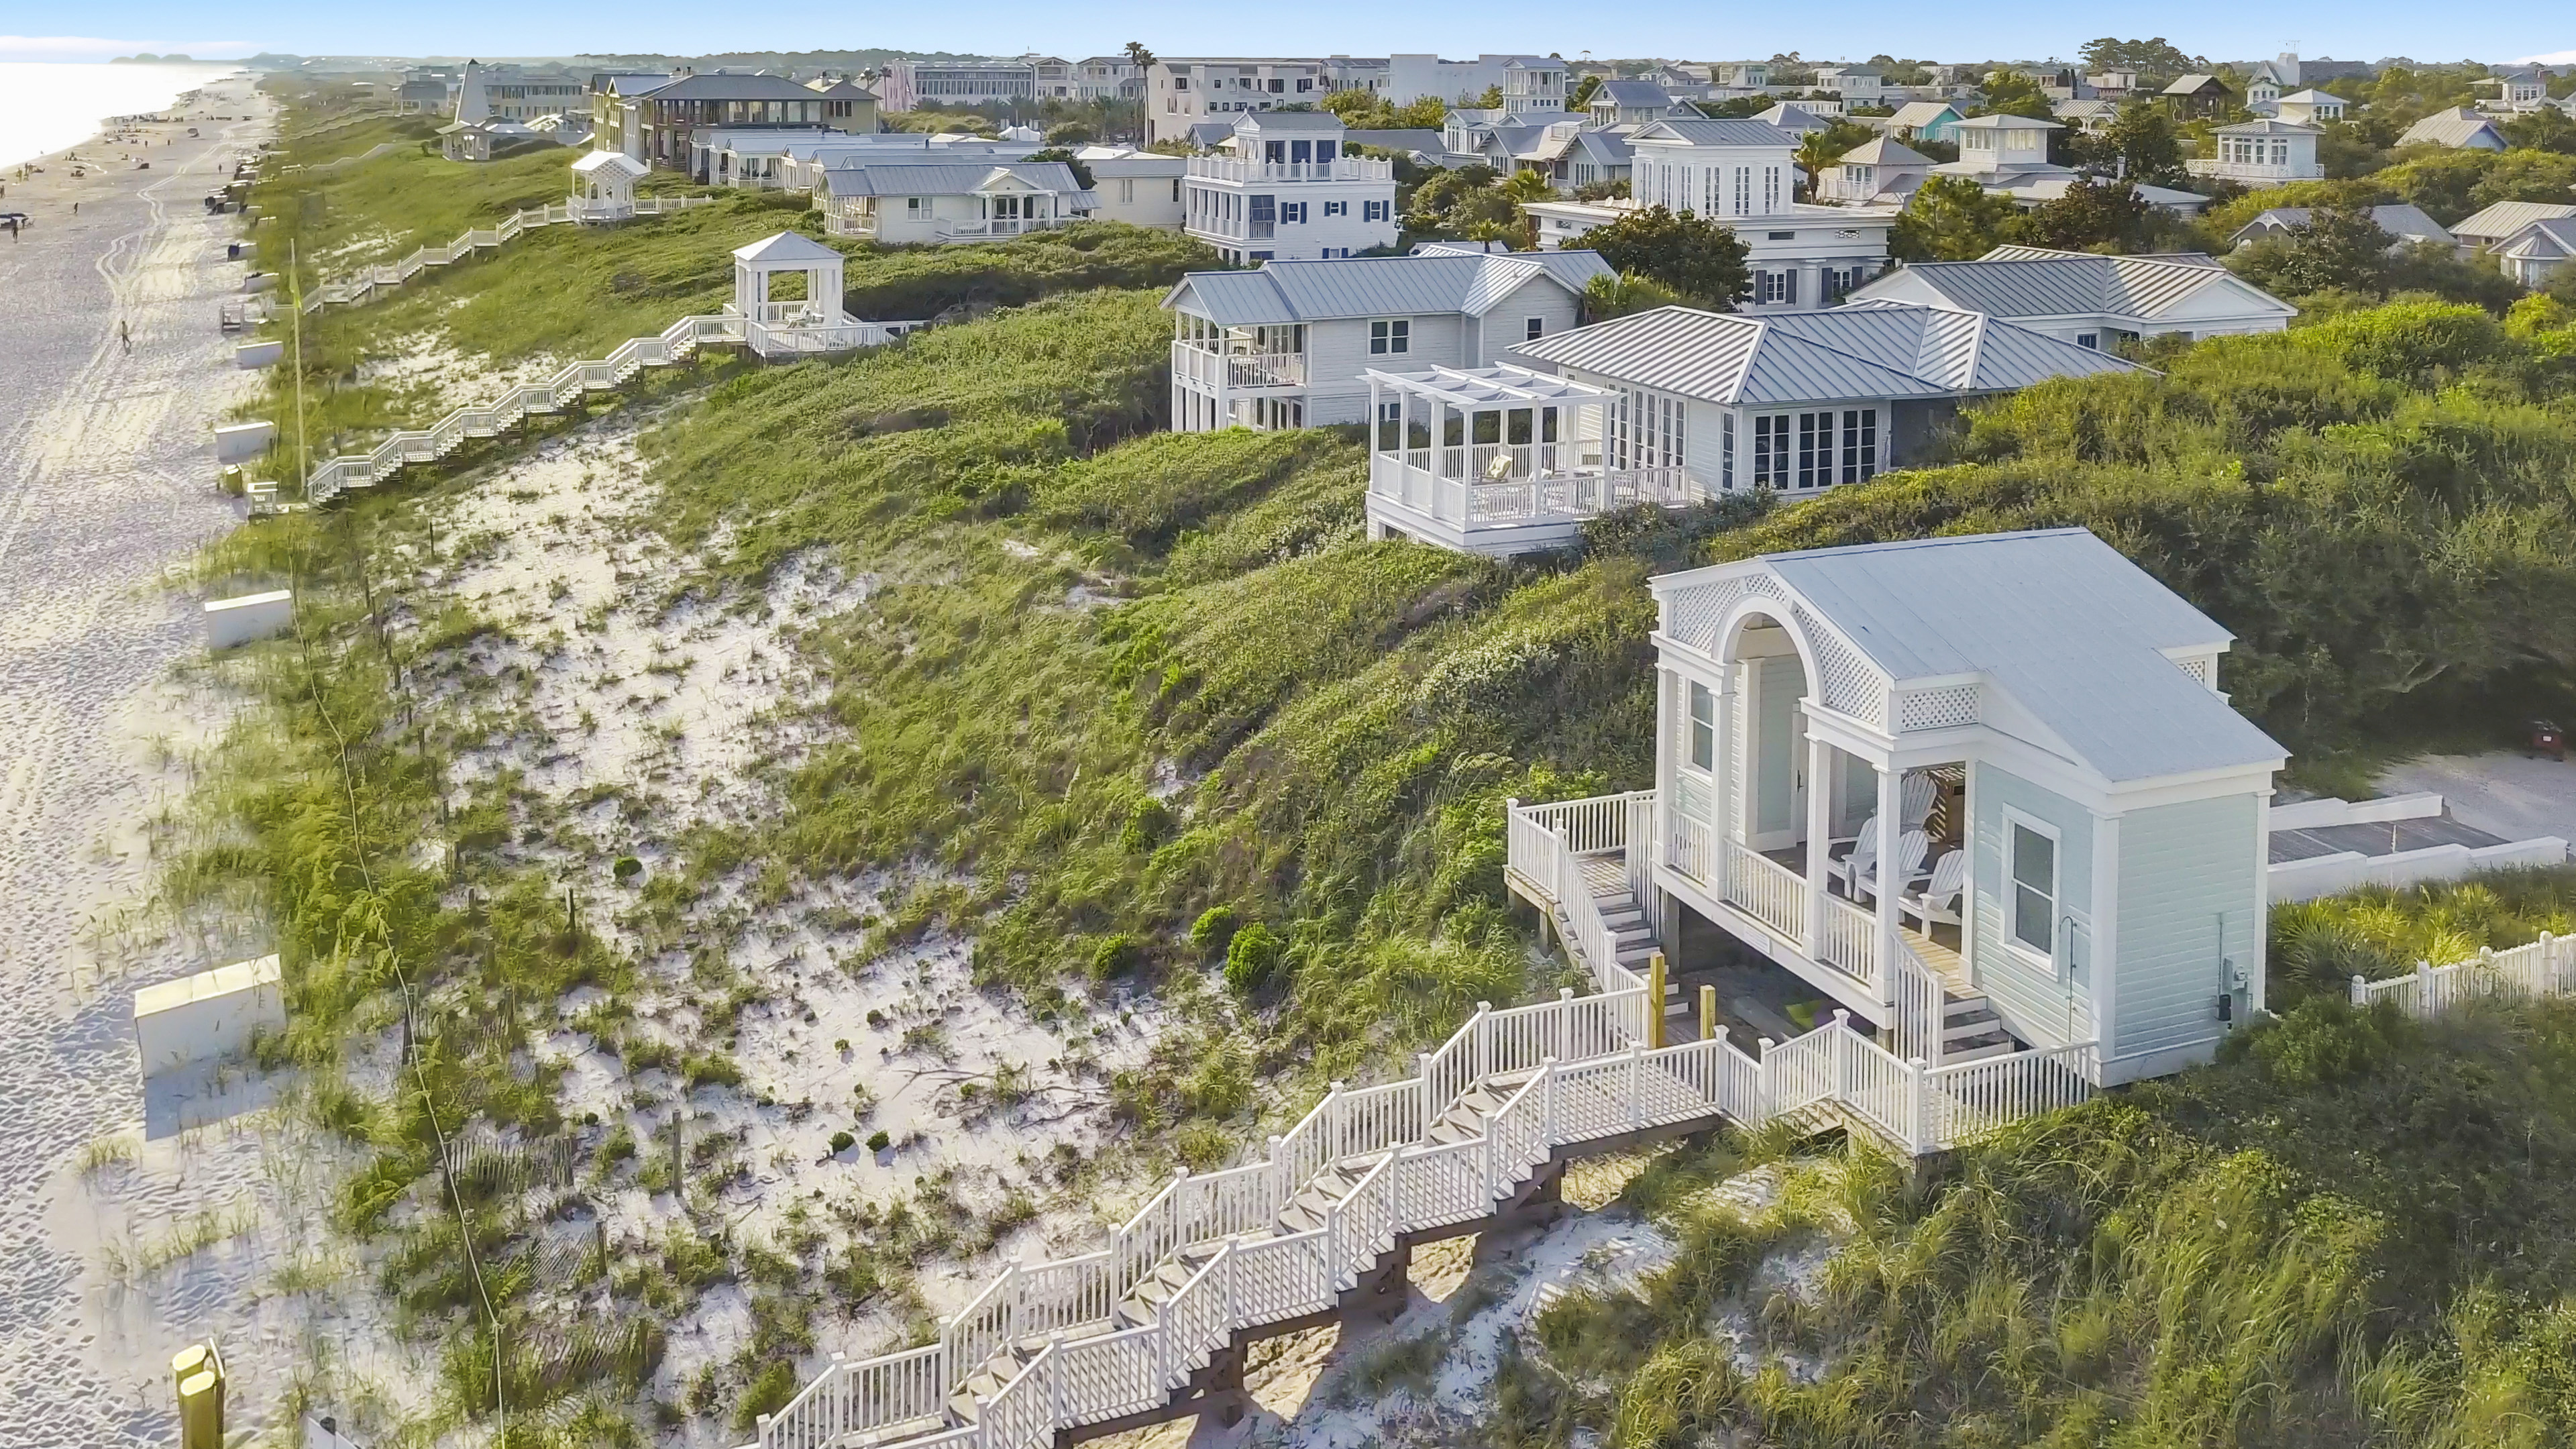 Discover Seaside Florida with Go To The Beach Christie's International Real Estate on Scenic 30A